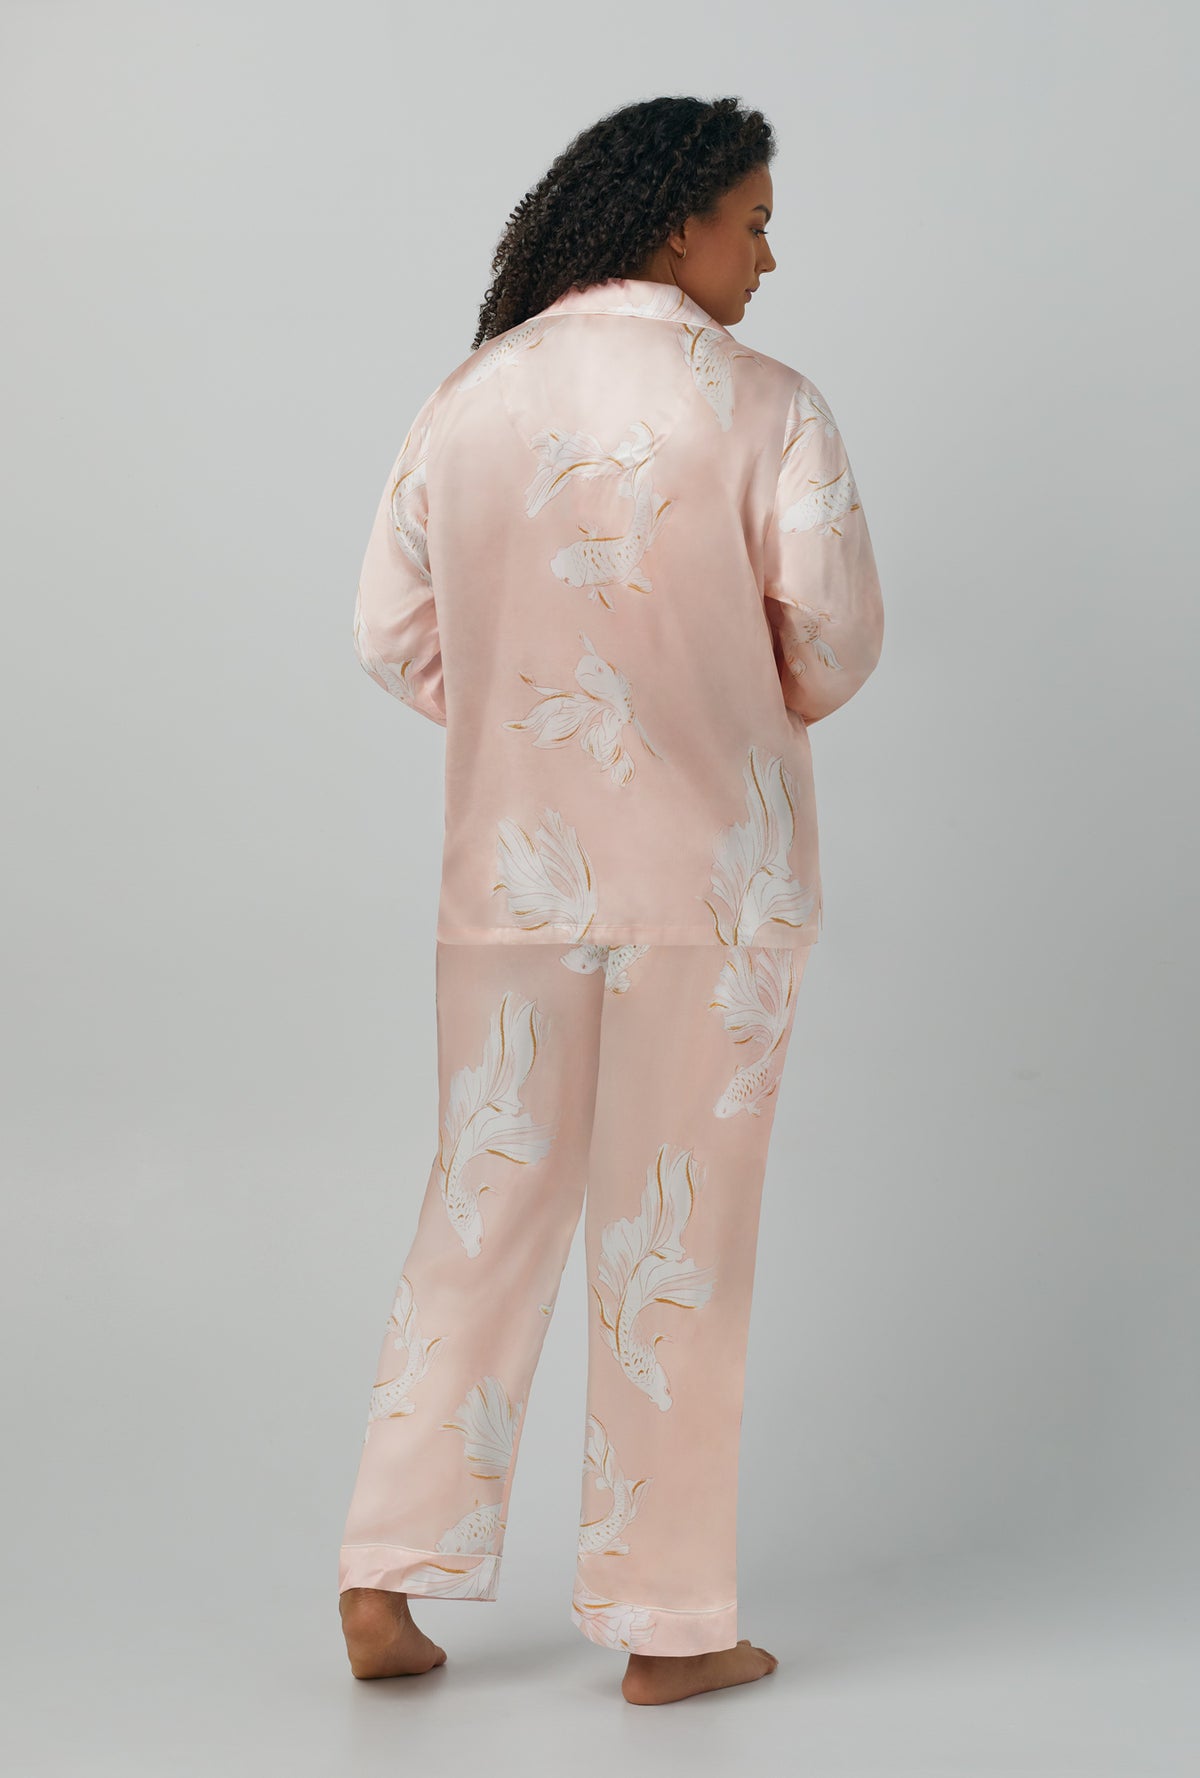 A lady wearing Long Sleeve Classic Washable Silk PJ Set with koi pond print